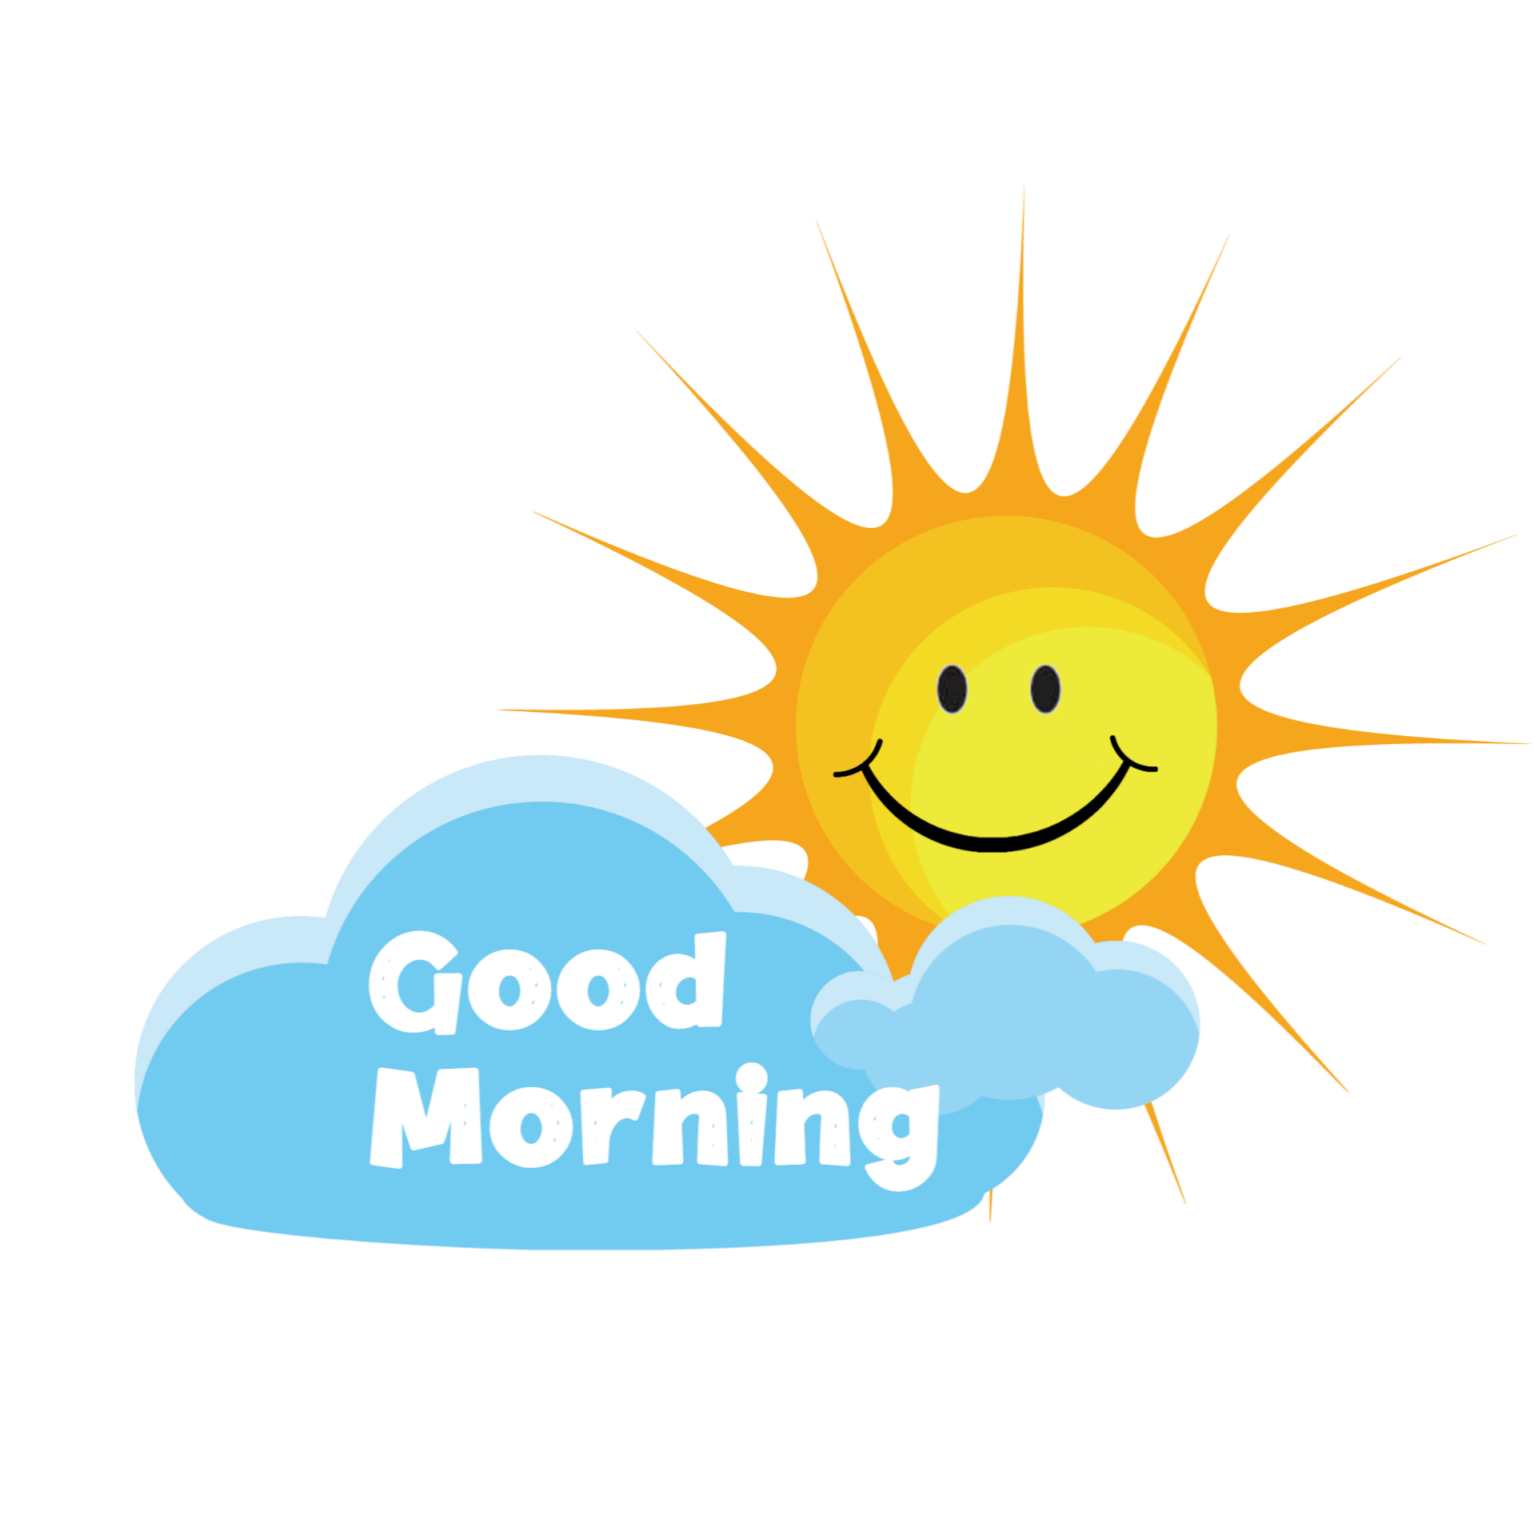 Good Morning PNG Transparent Images Free Download - Pngfre